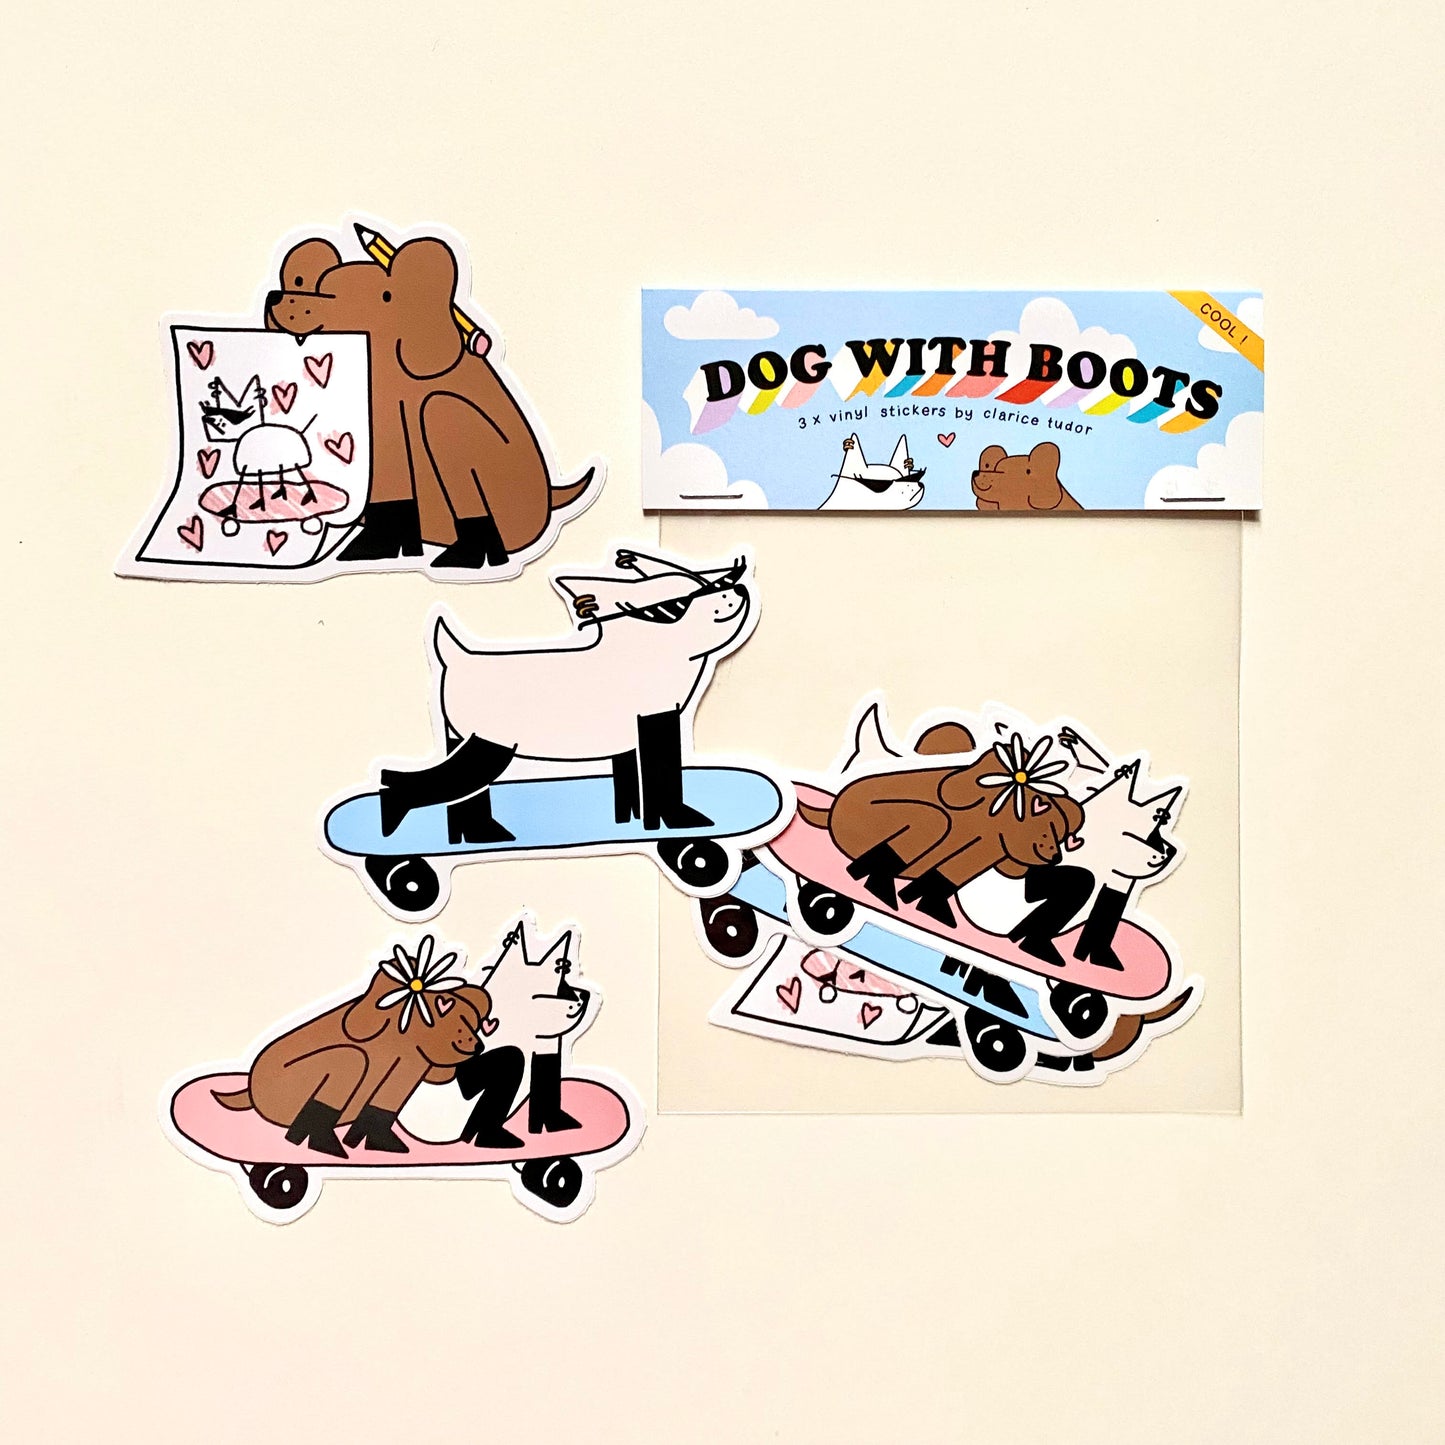 Dog with Boots Webcomic Sticker Pack